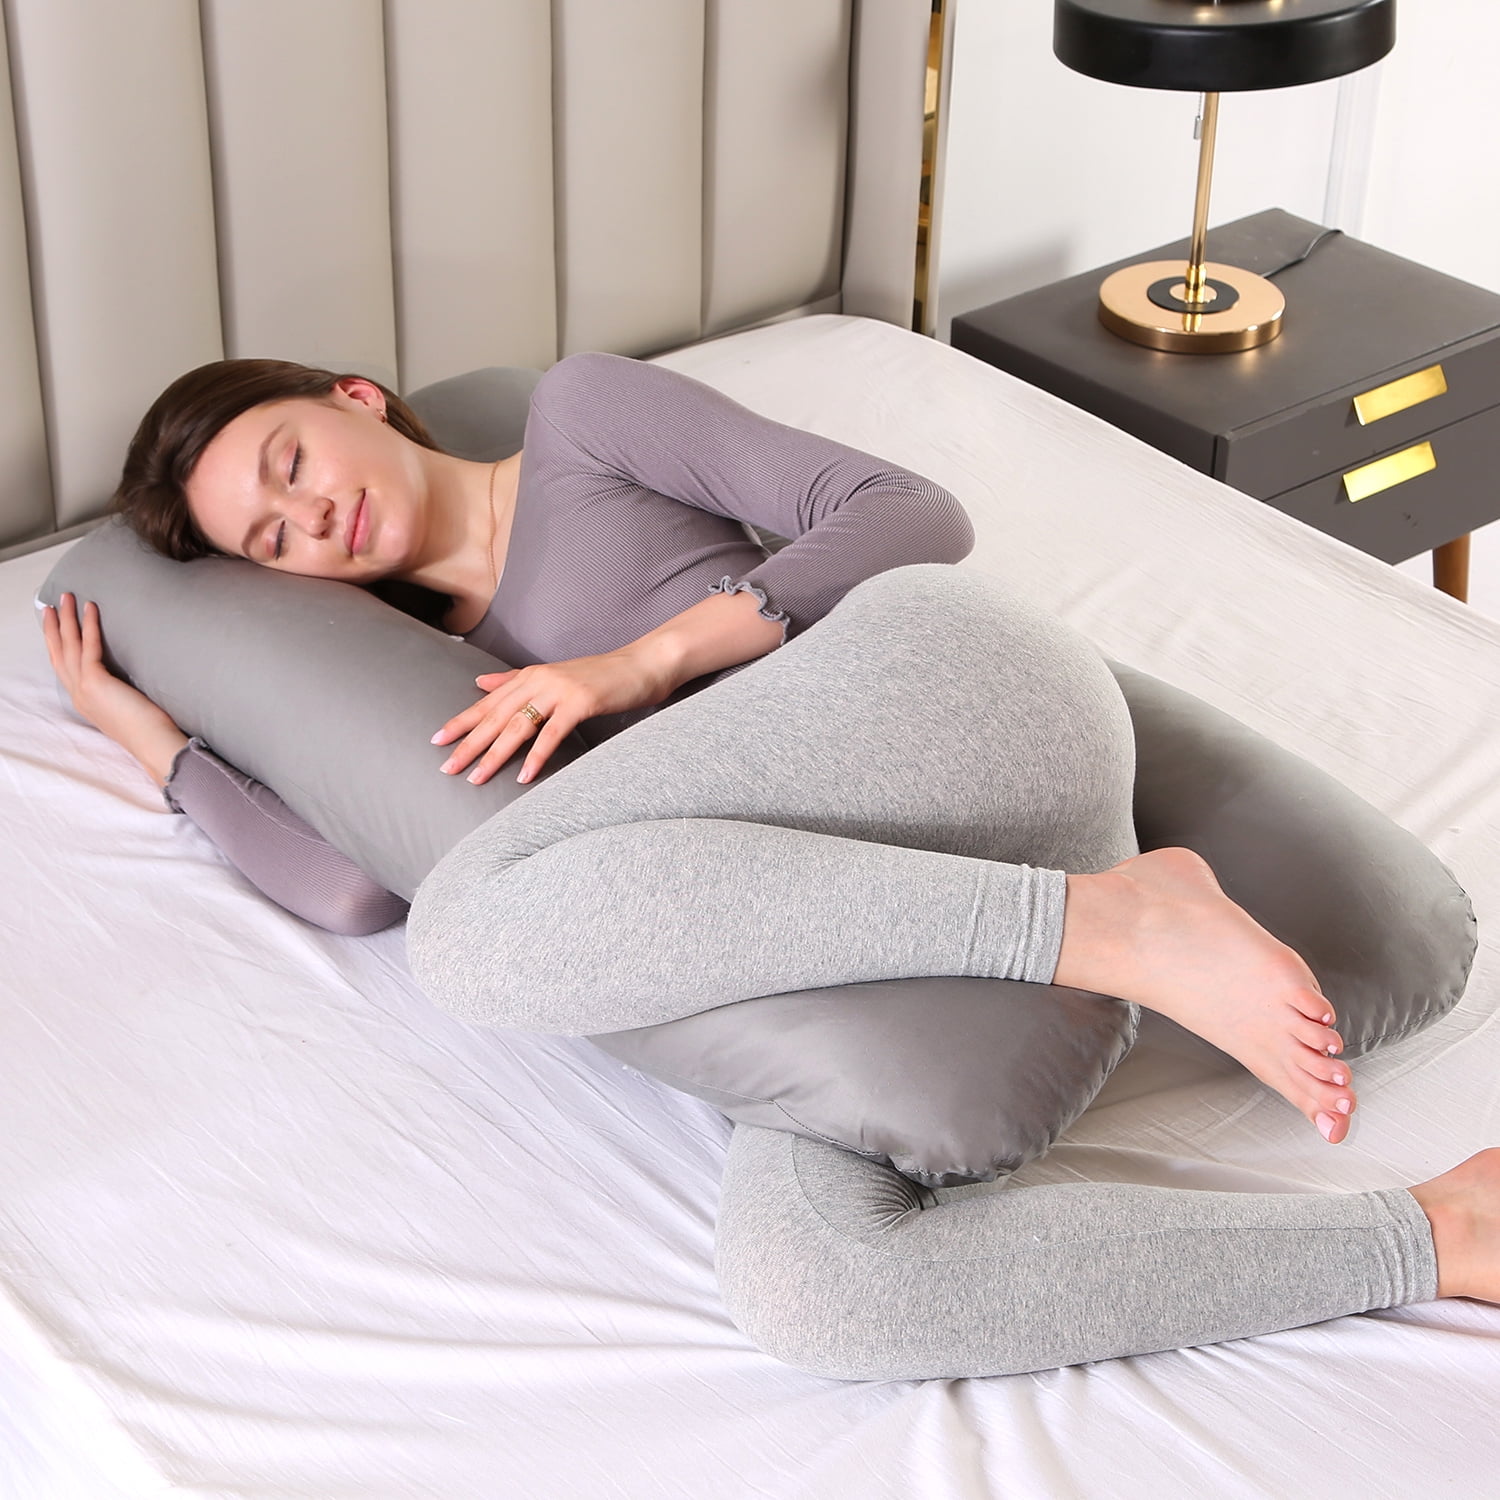 OLOEY Pregnant Women Sleeping Support Pillow Multi-Function U Shape Pillows  for Maternity Pregnancy Back Waist Cushion Protect Waists 